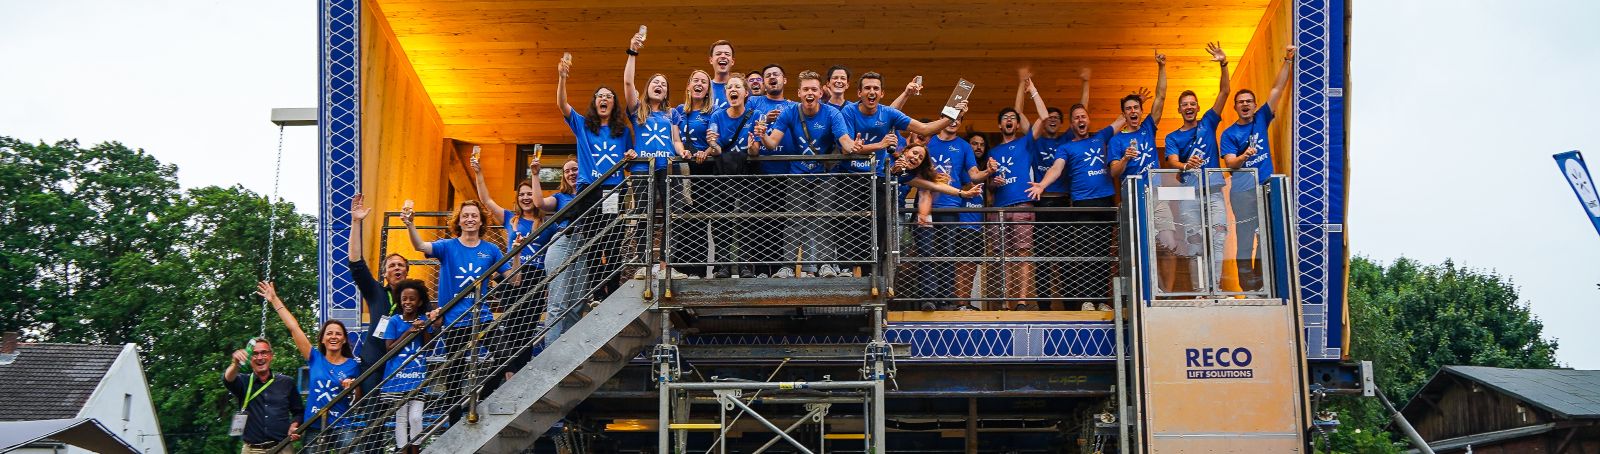 The RoofKIT winning team celebrates their achievement at Solar Decathlon Europe 21/22 next to their demonstration house on the premises of the Solar Campus in Wuppertal.